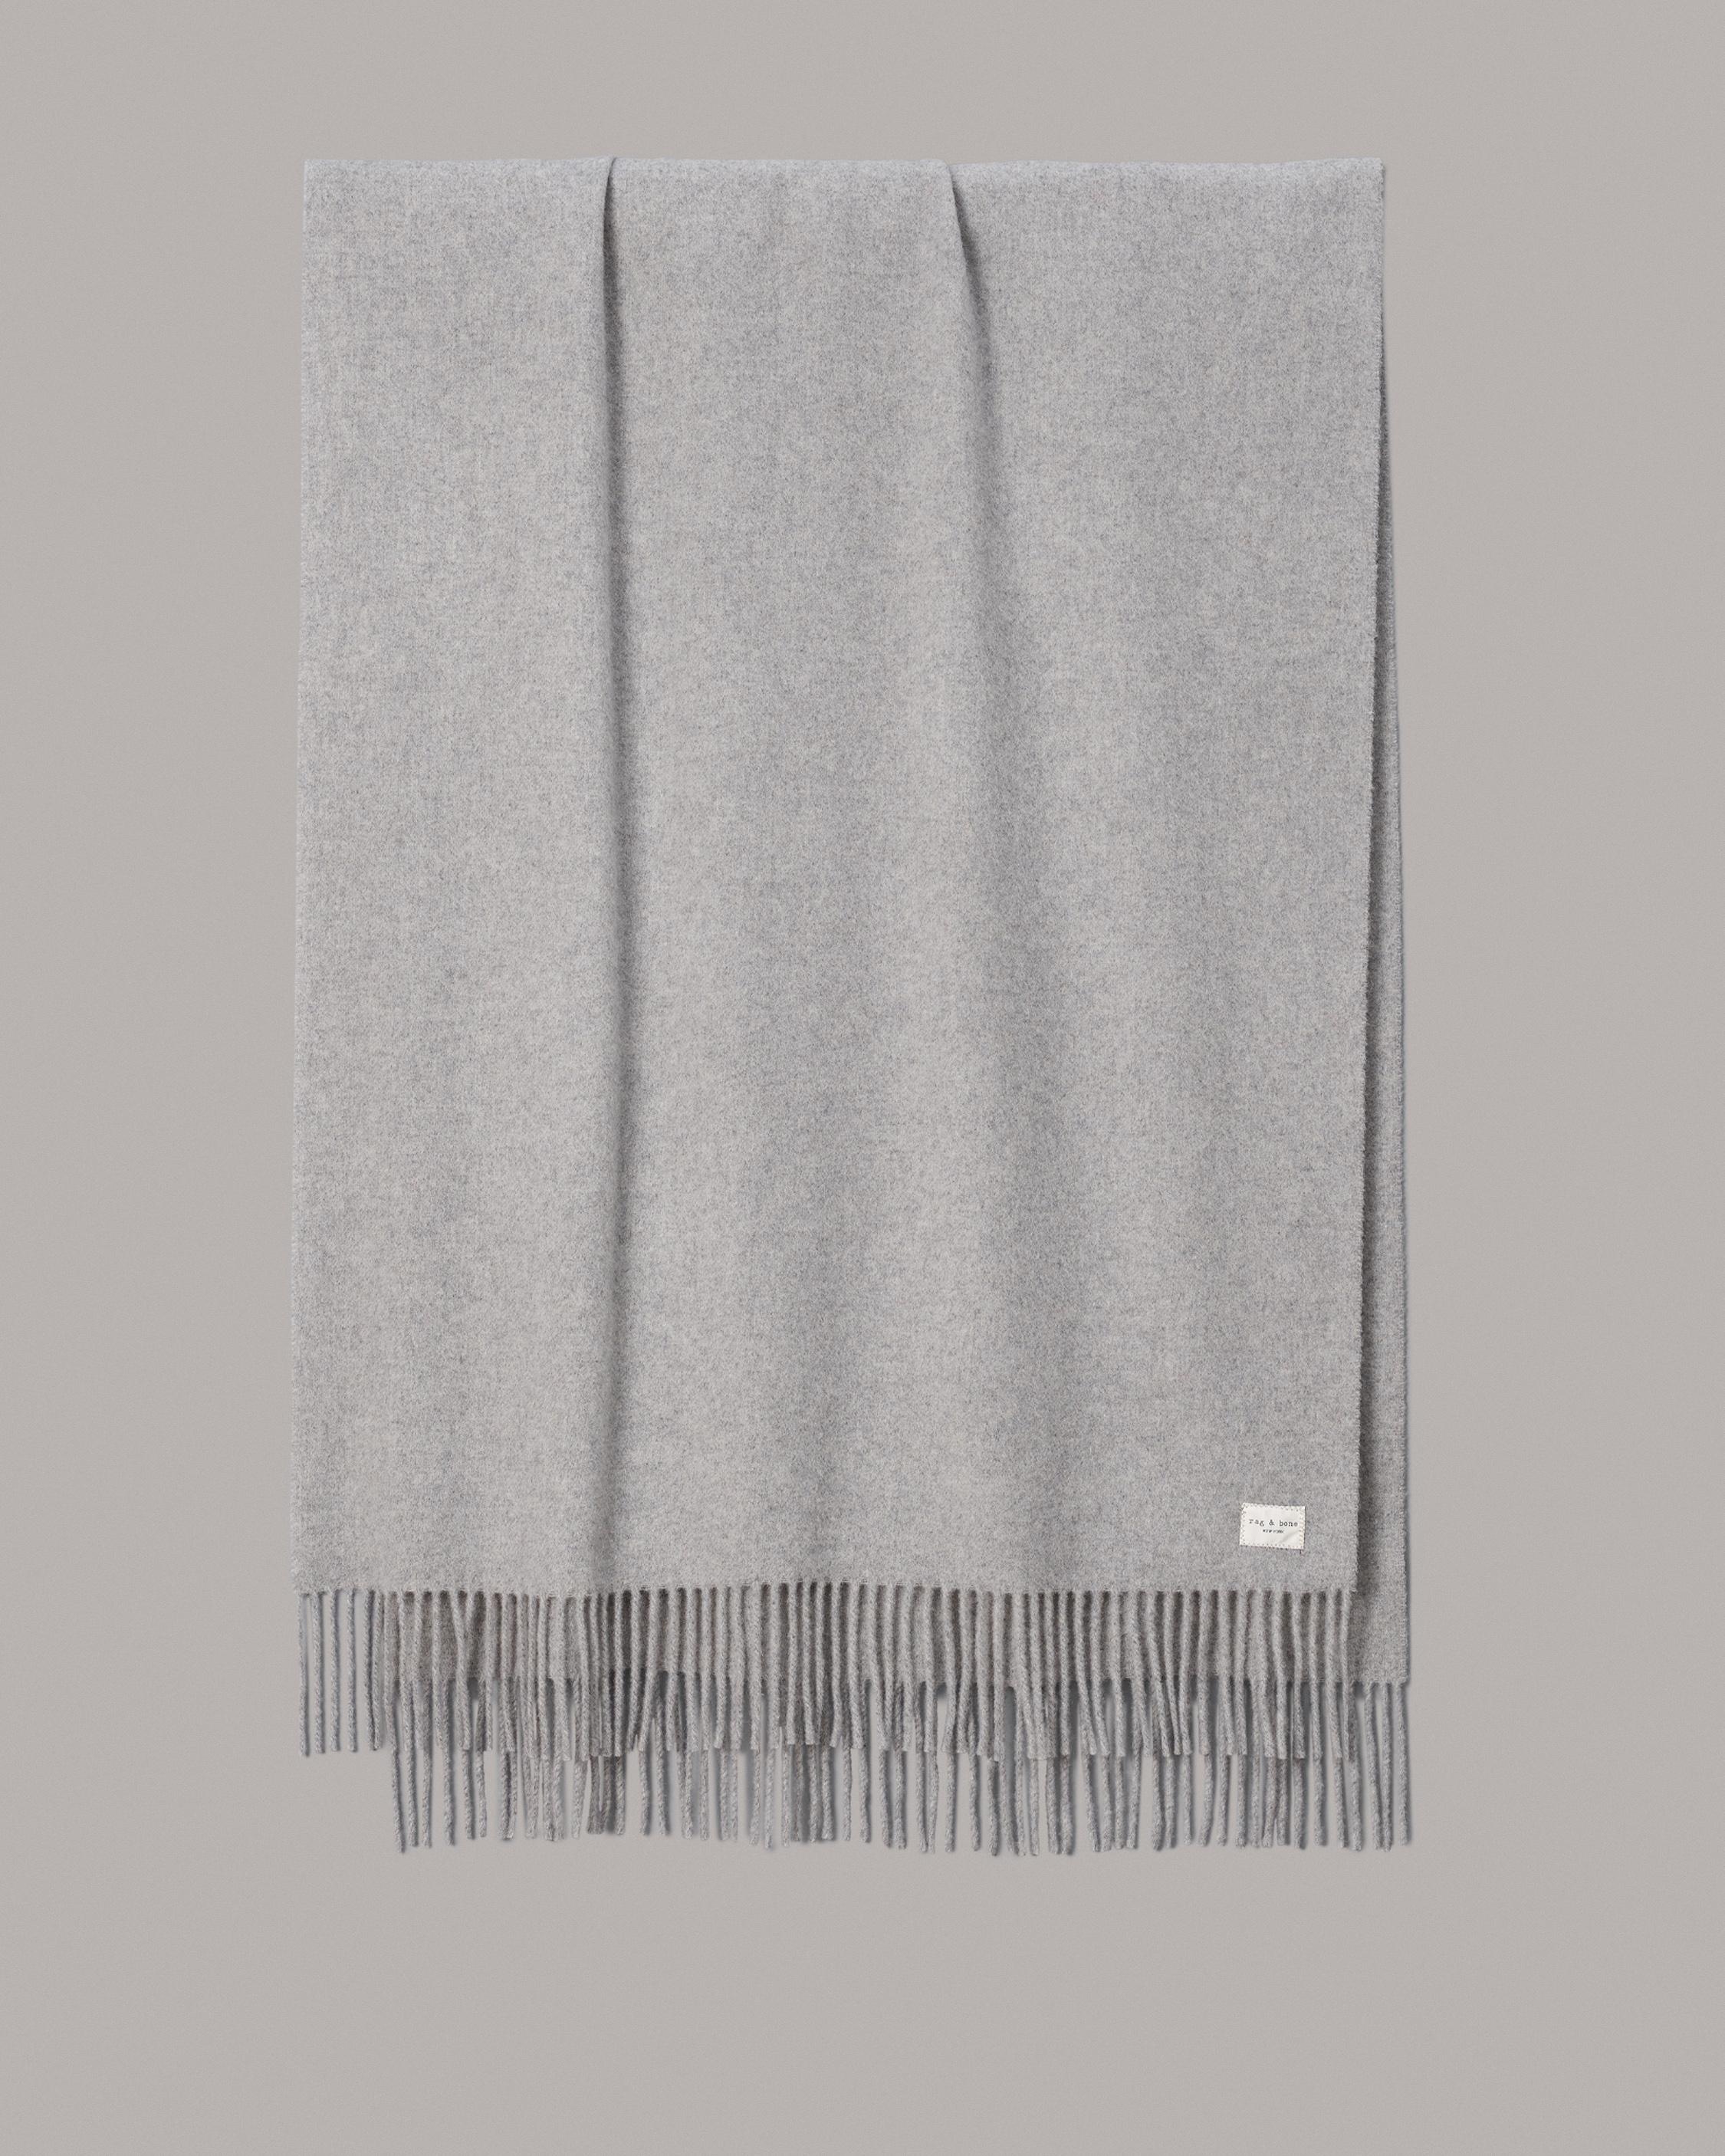 Addison Recycled Wool Scarf
Midweight Scarf - 1